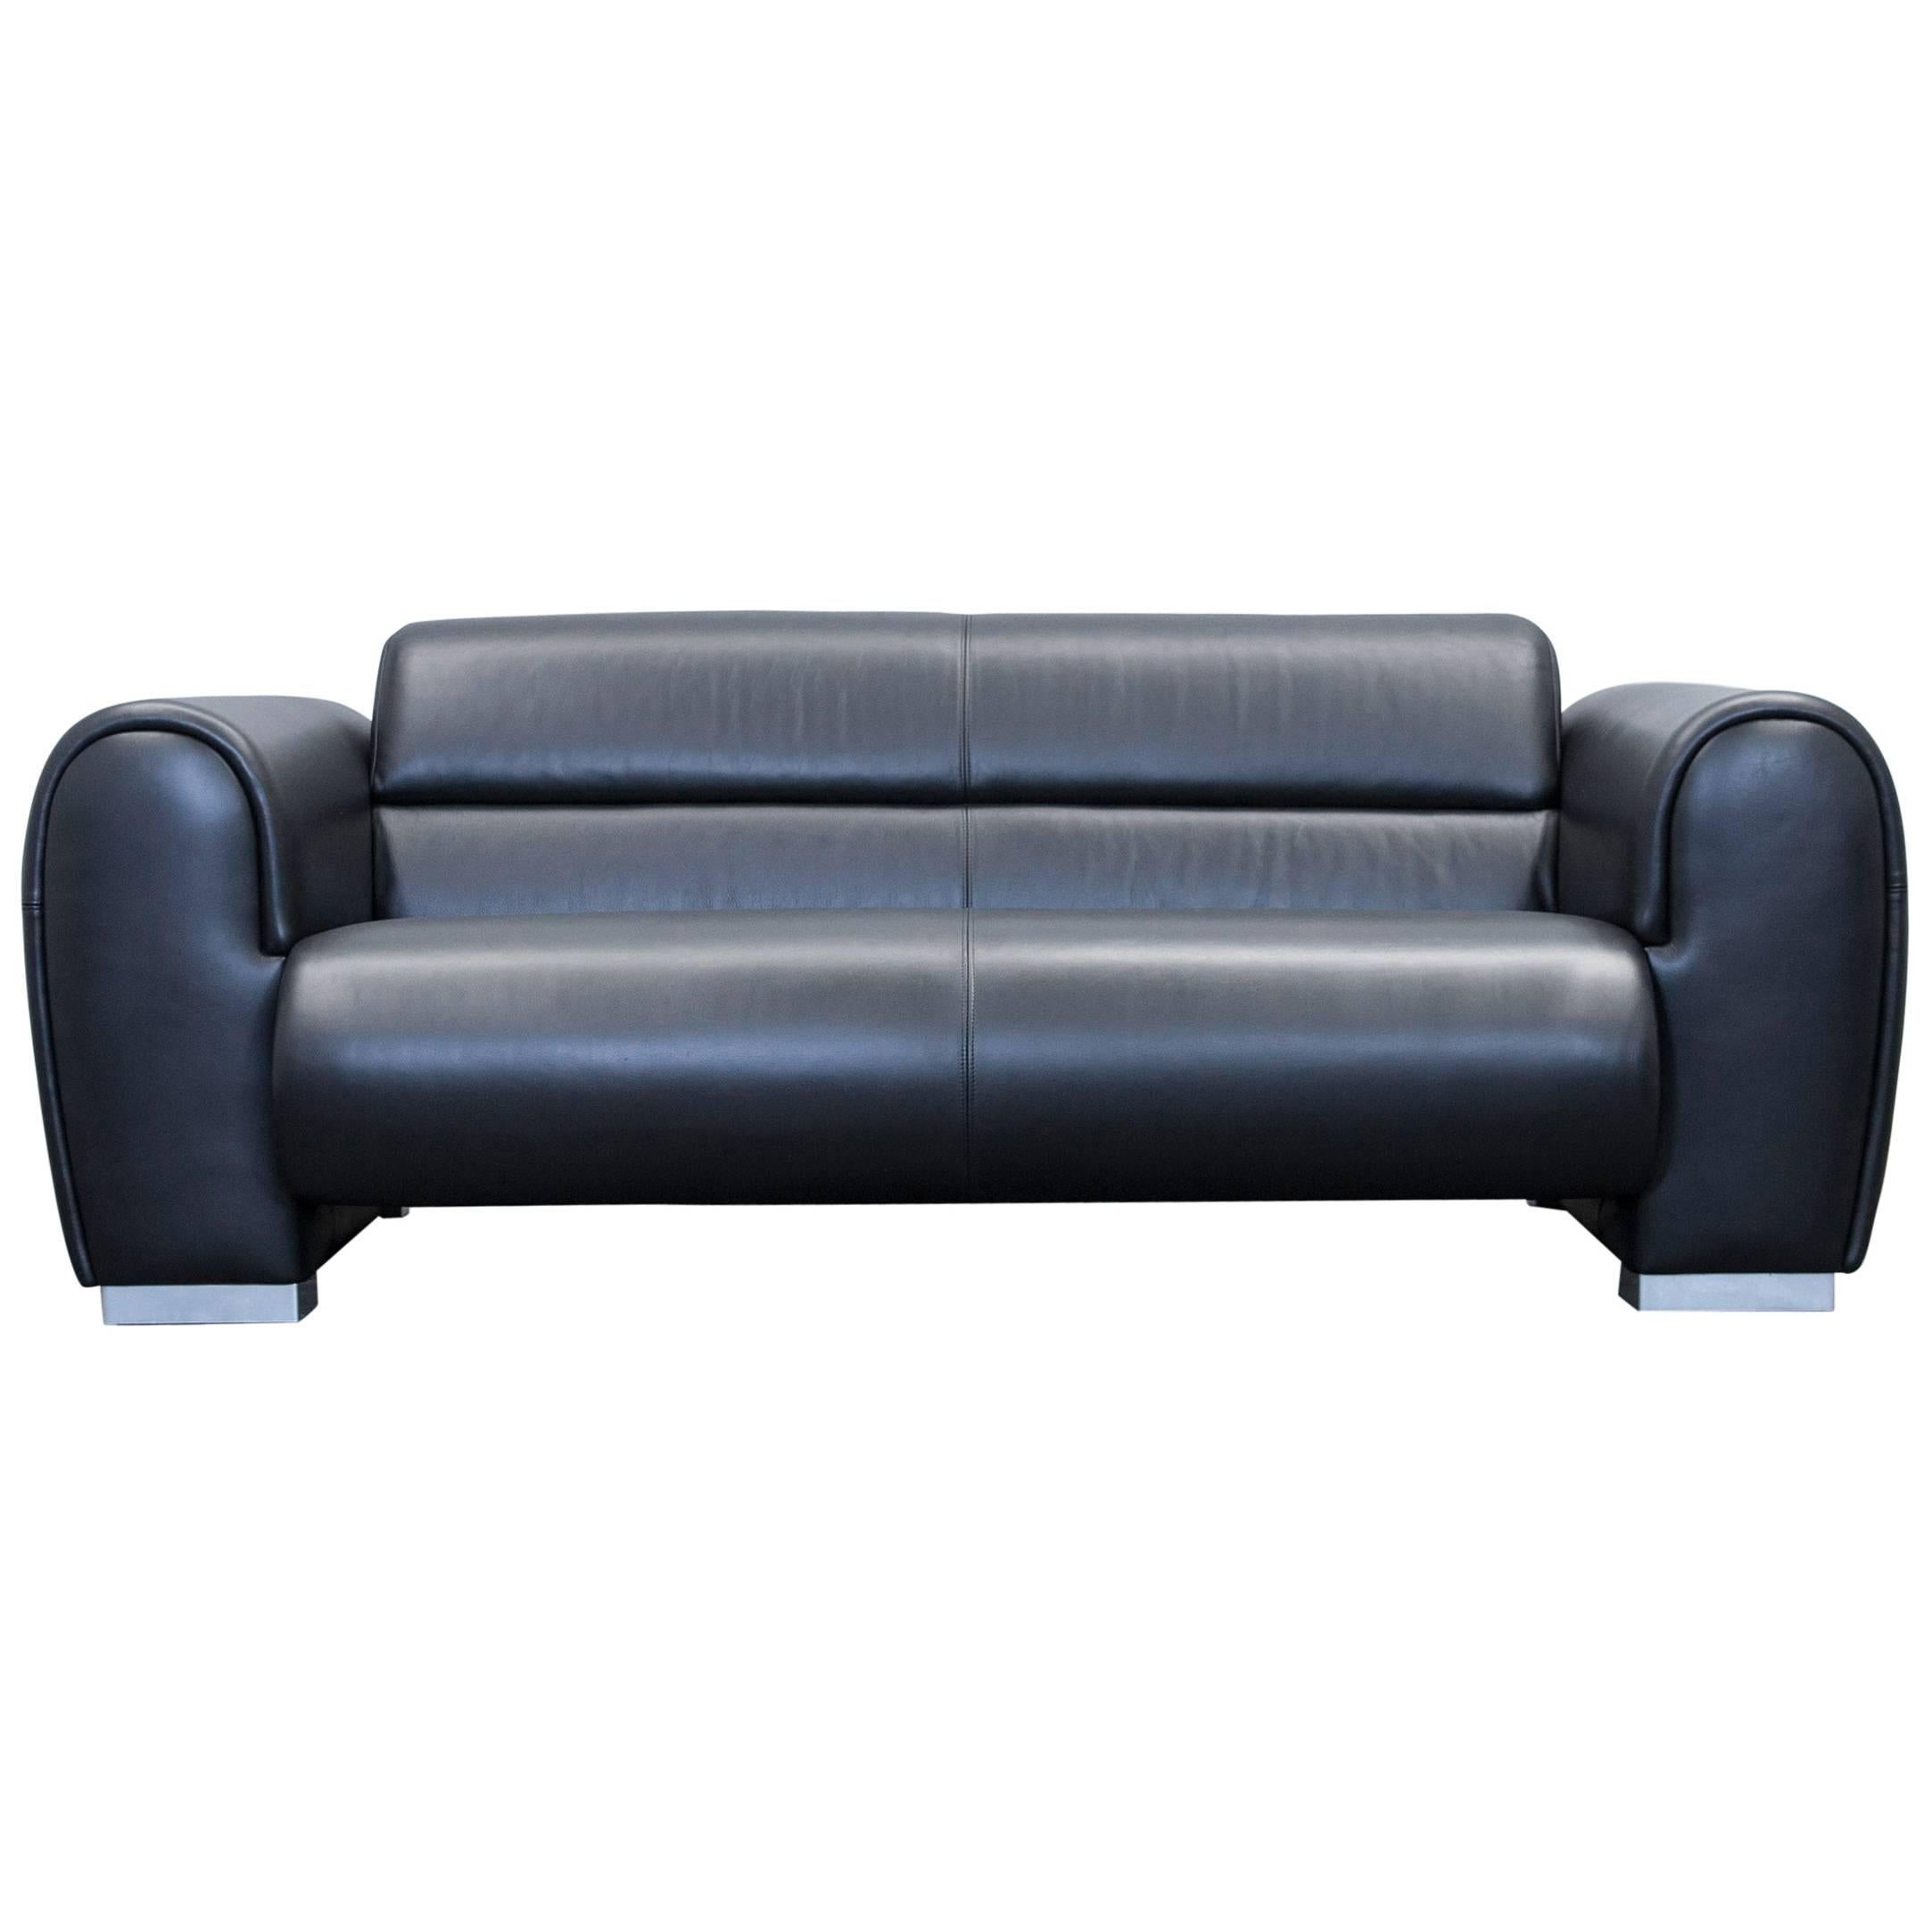 Brühl & Sippold Sumo Designer Sofa Leather Black Two-Seat Couch Modern For Sale